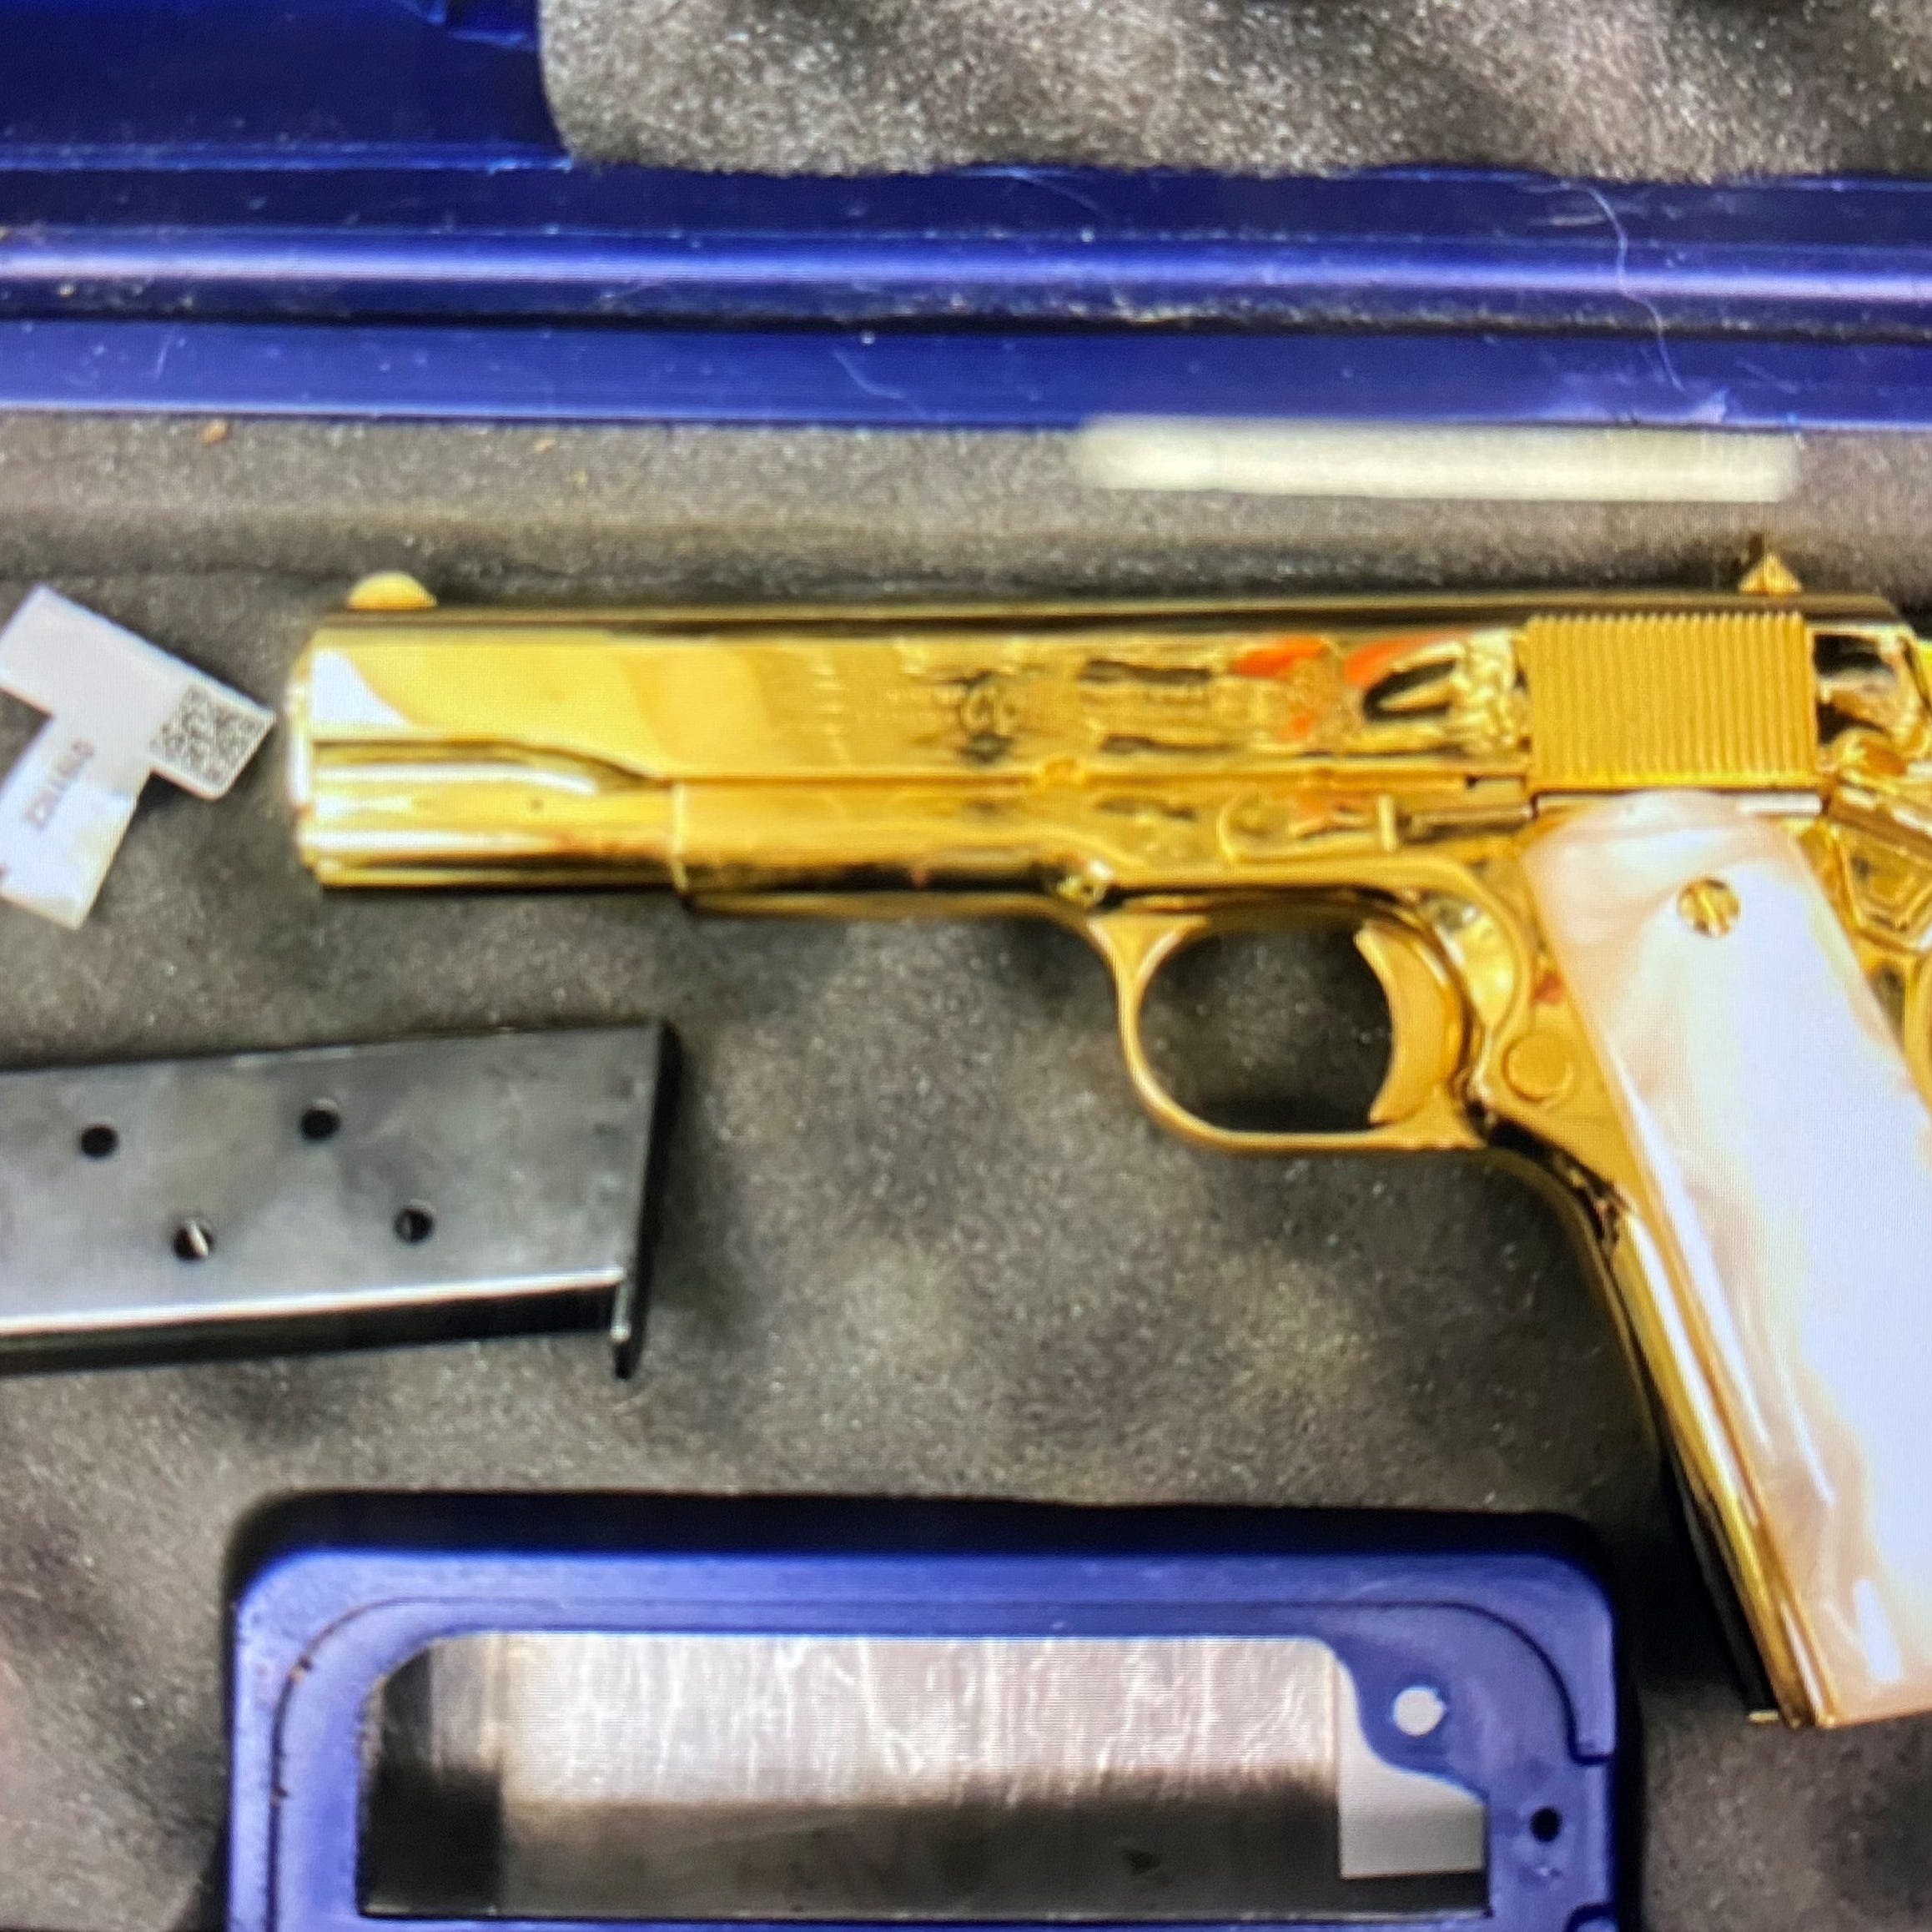 Australia Border Force officers arrested a a 28-year-old American in Sydney after she arrive on flight from Los Angeles with 24-carat gold-plated handgun packed in her luggage on April 24, 2023.